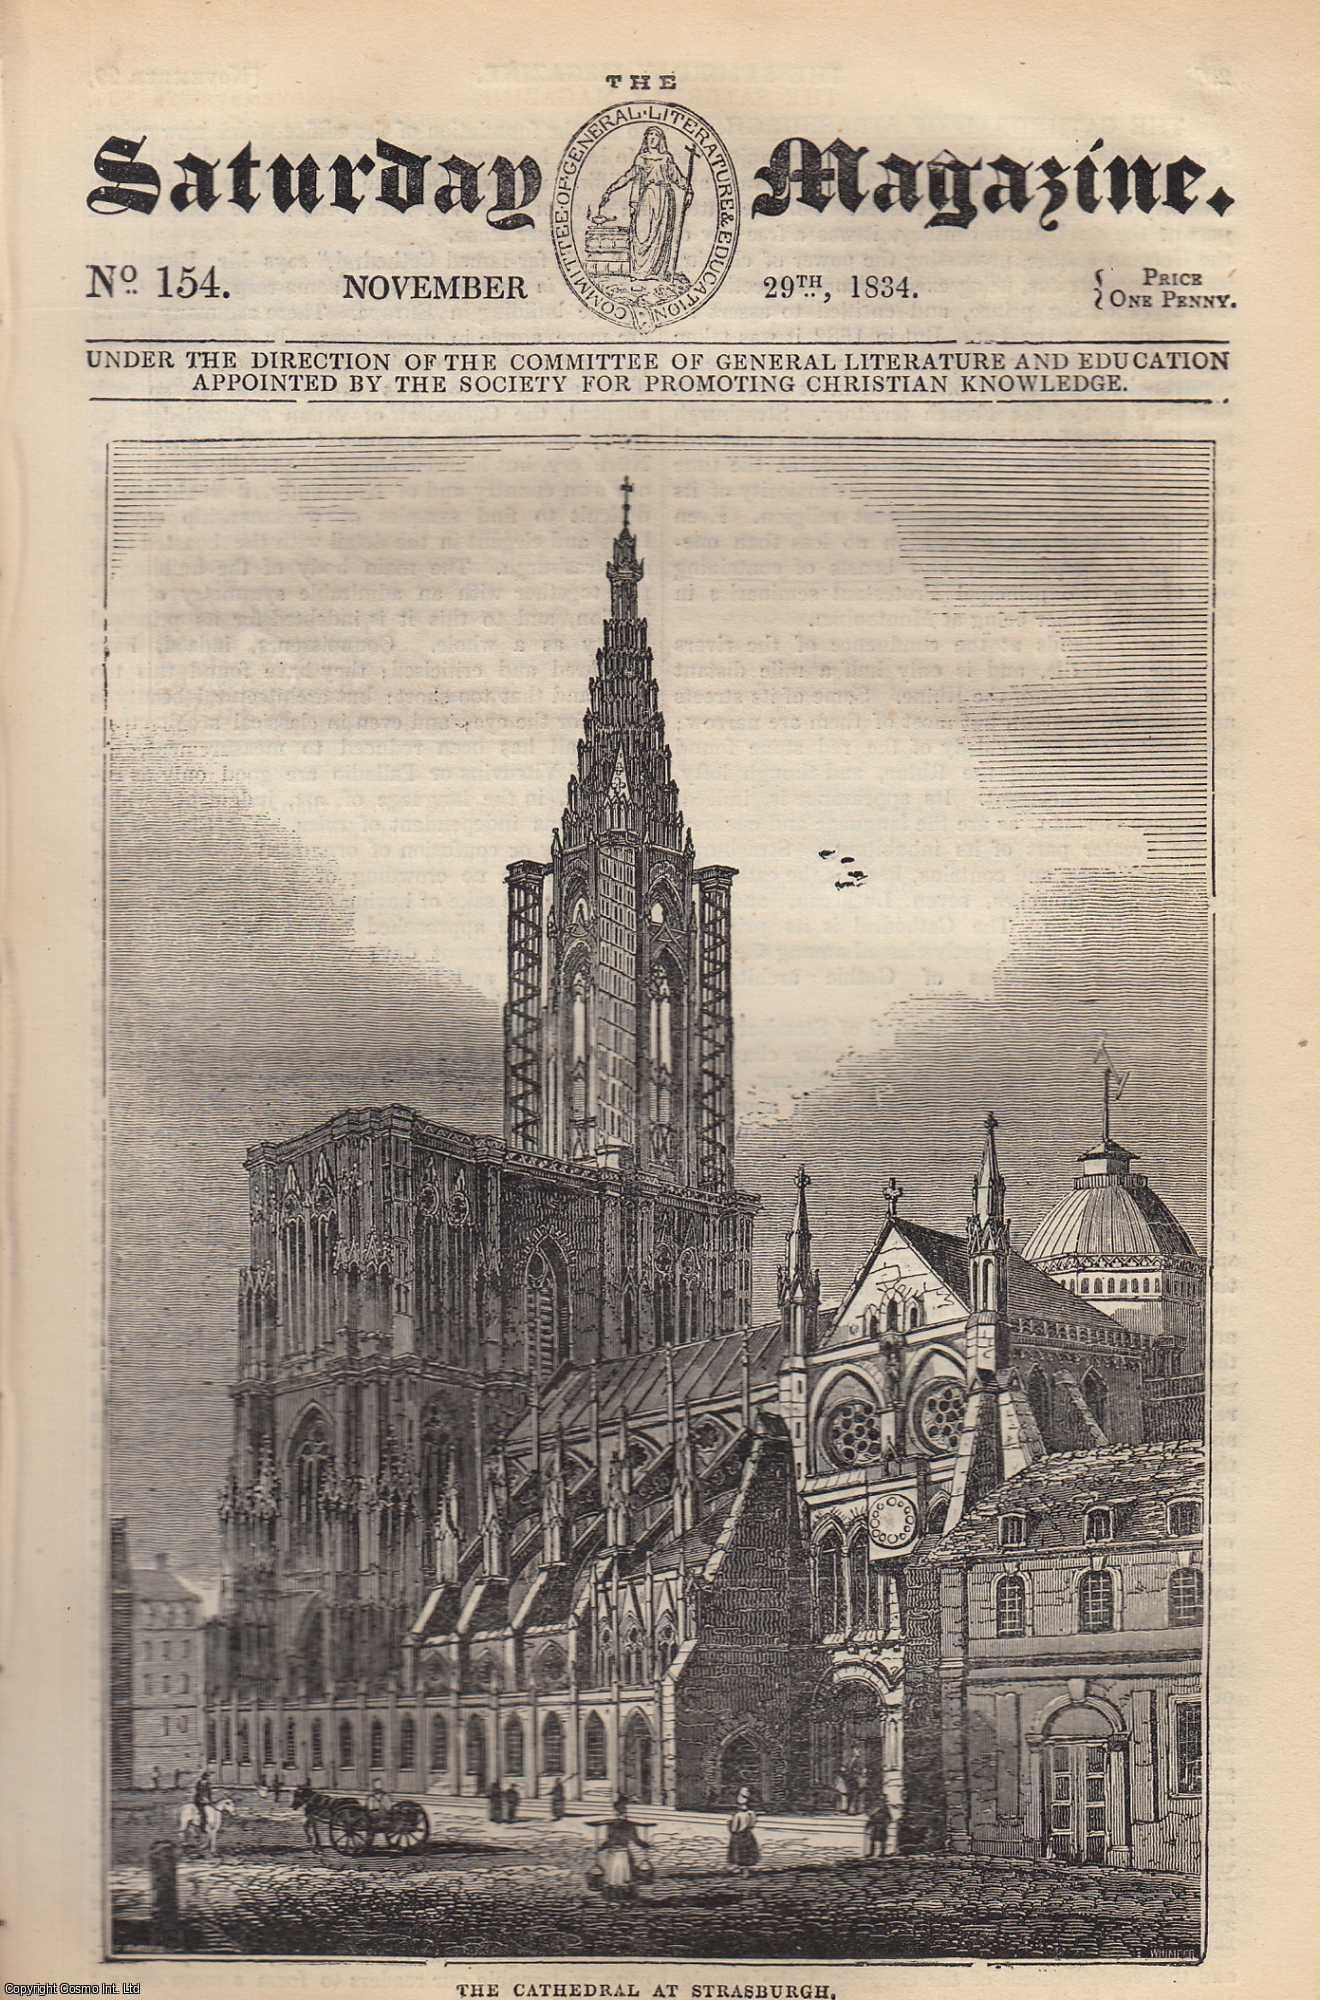 Saturday Magazine - The Cathedral of Strasburgh; The Luminous Appearance of The Sea; The Entry into Toulouse; The Last Days and Thoughts of Dr. Johnson. Issue No. 154. November, 1834. A complete rare weekly issue of the Saturday Magazine, 1834.